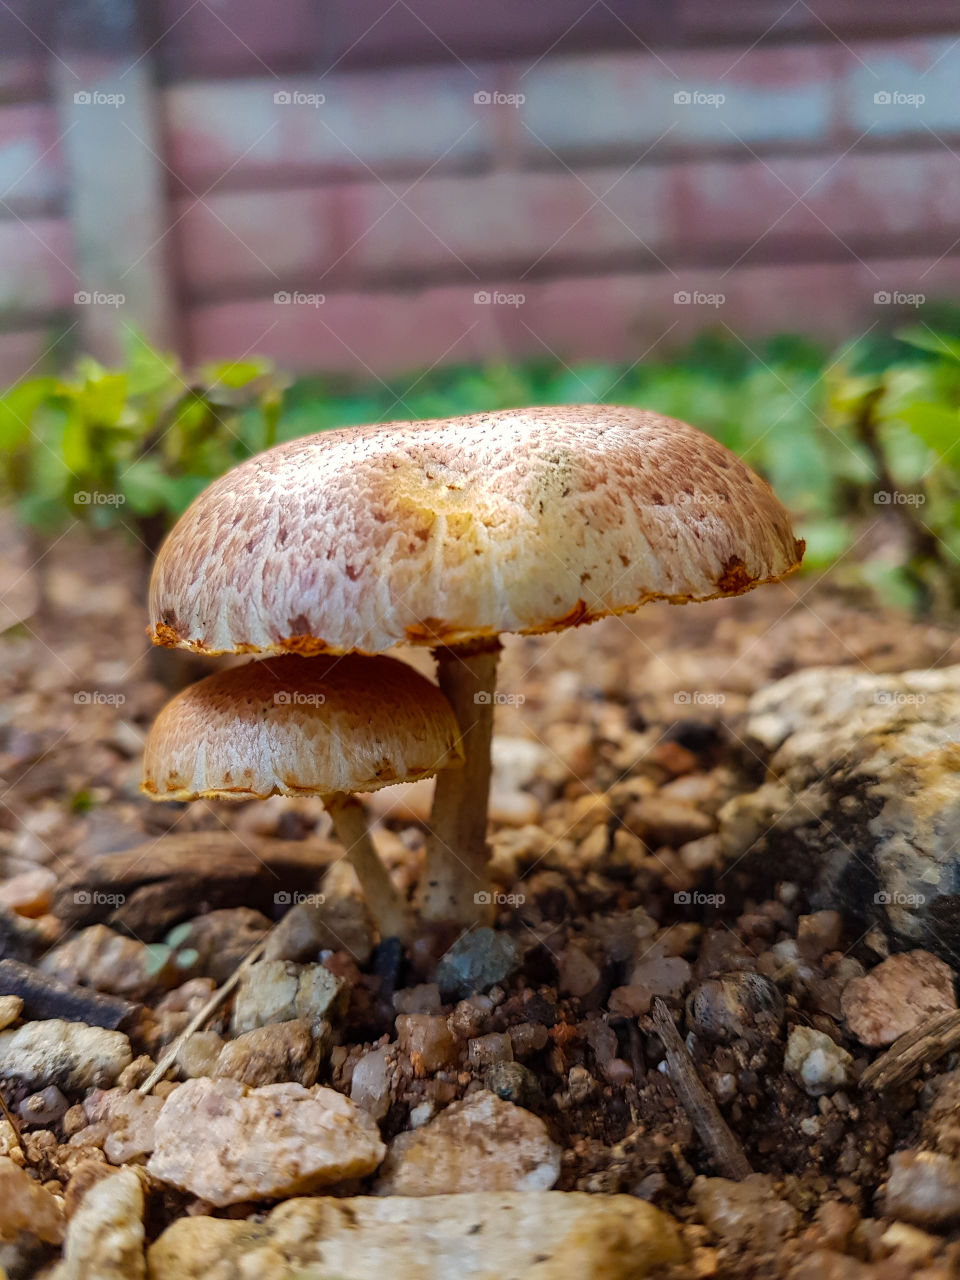 two mushrooms growing from the soil